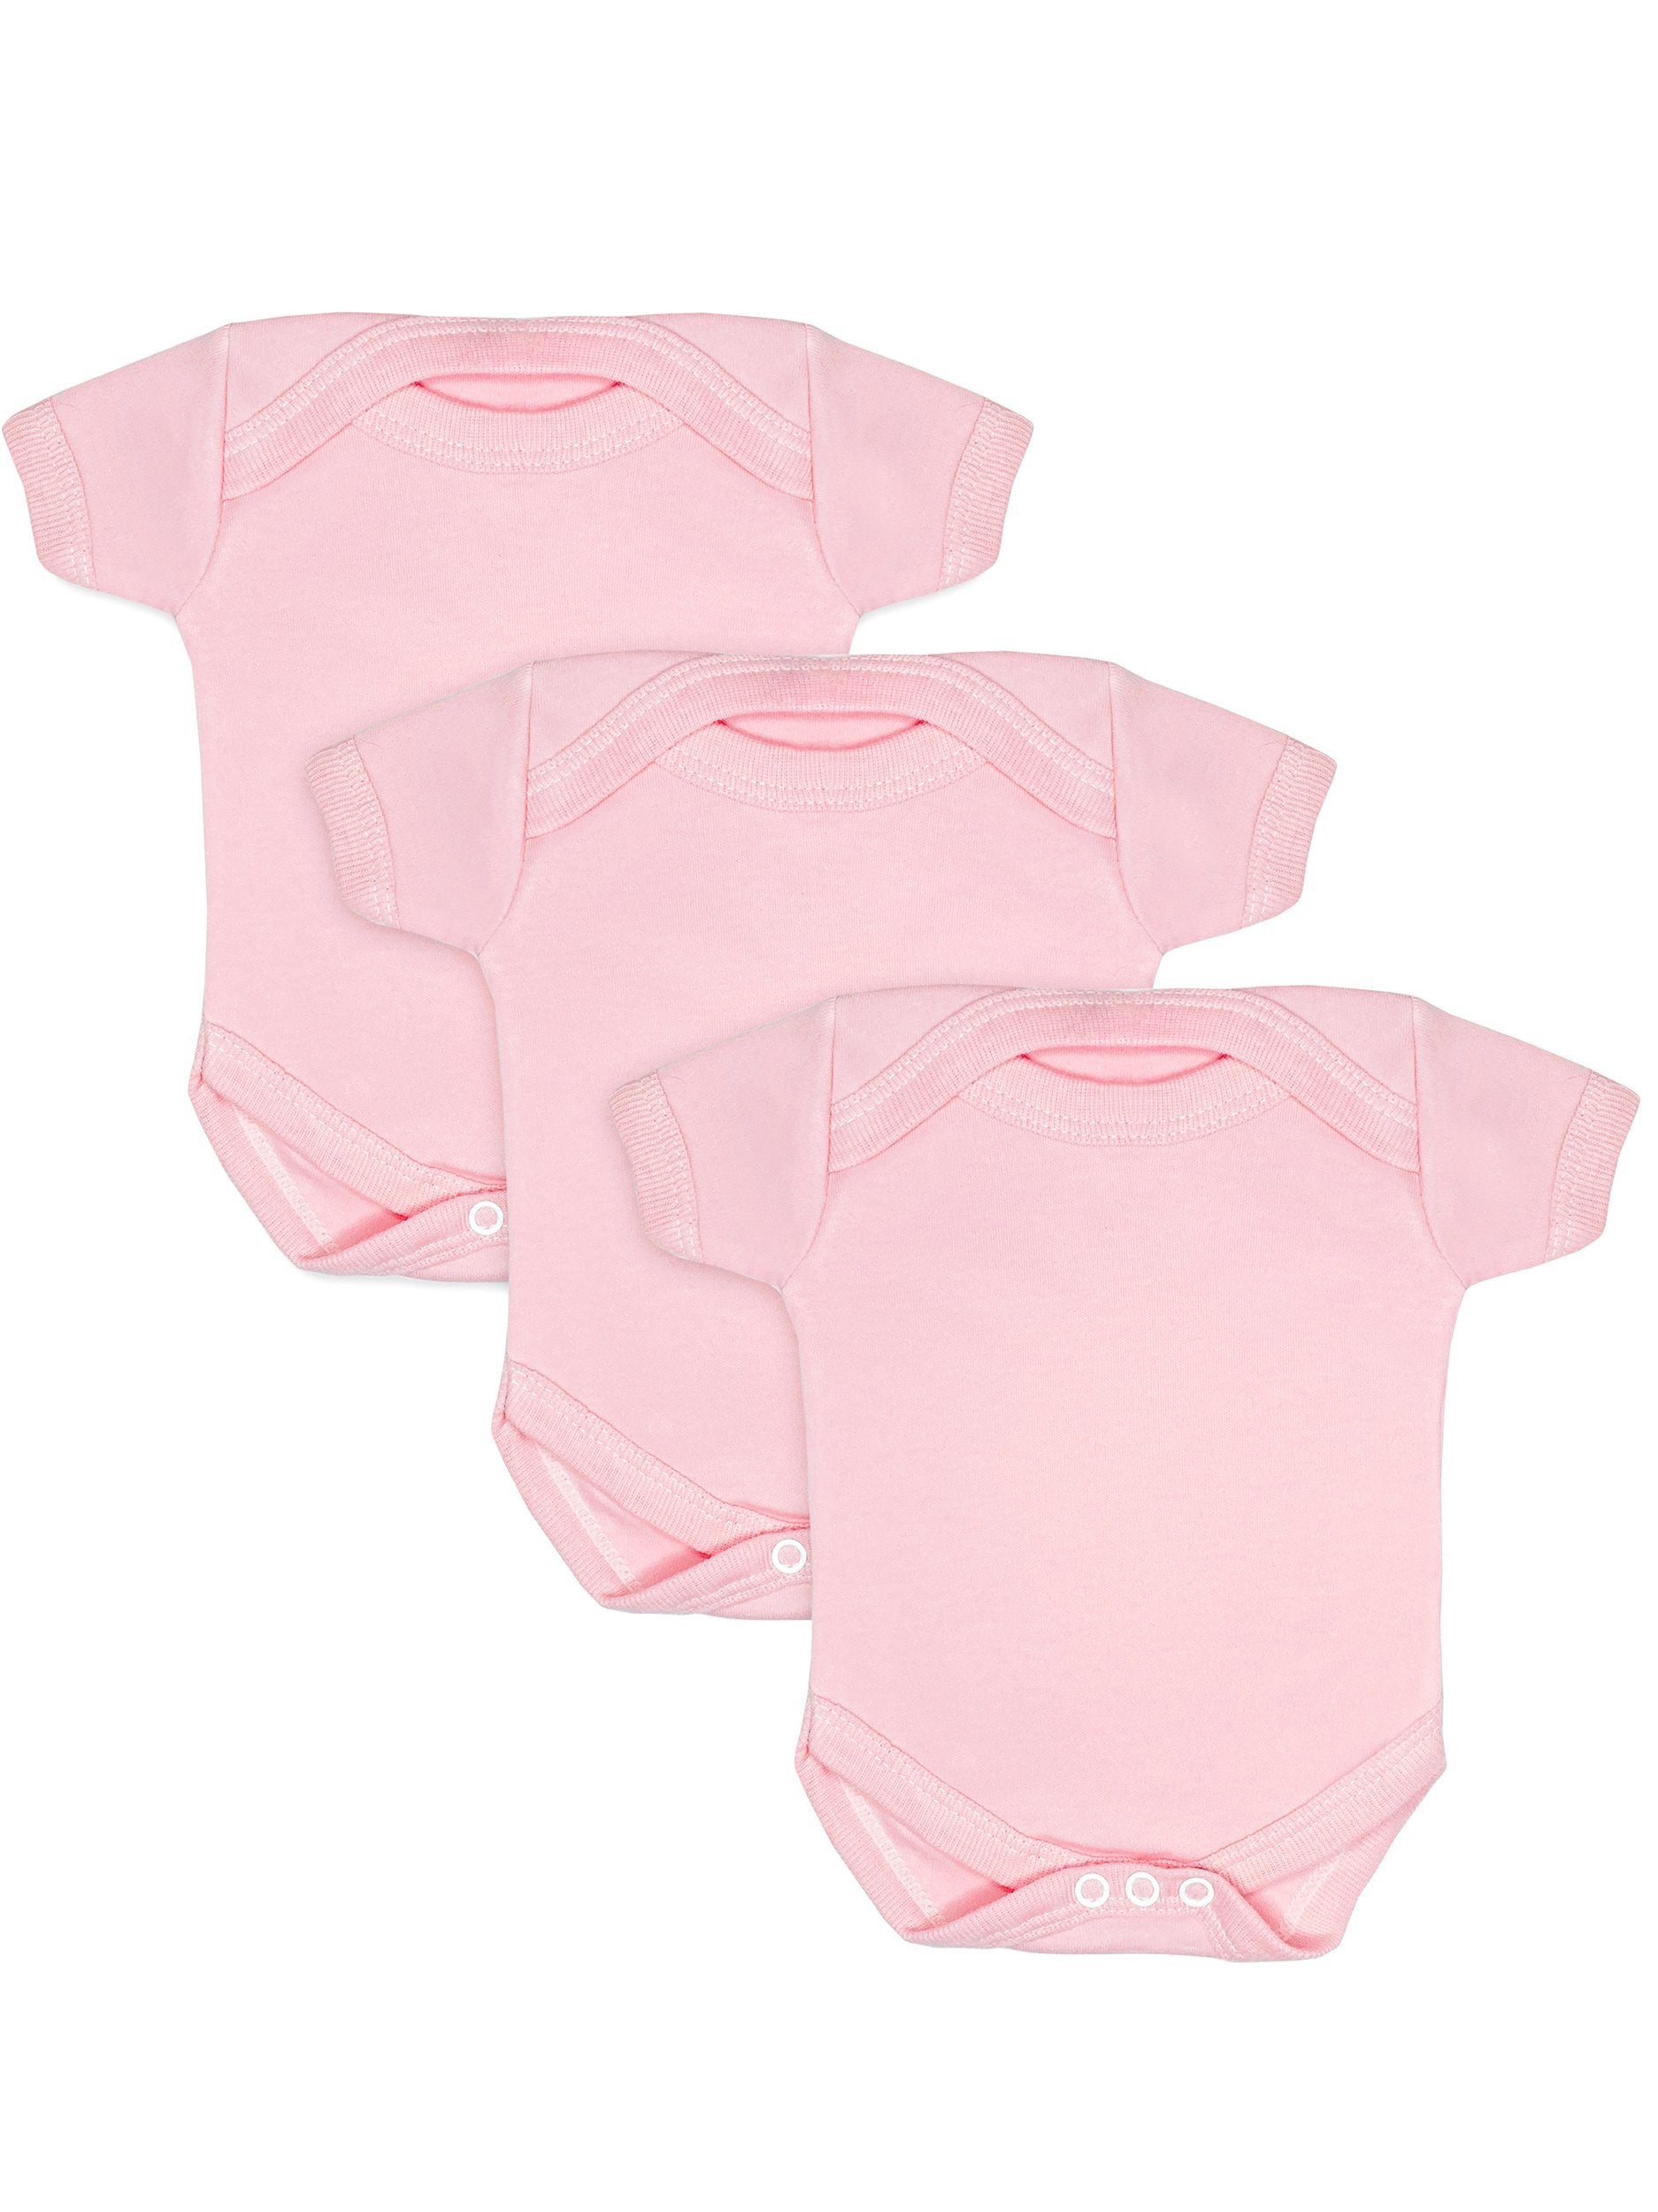 3 Pack - 100% Cotton Pink Short Sleeved Bodysuits Set/Multipack Little Mouse Baby Clothing & Gifts 